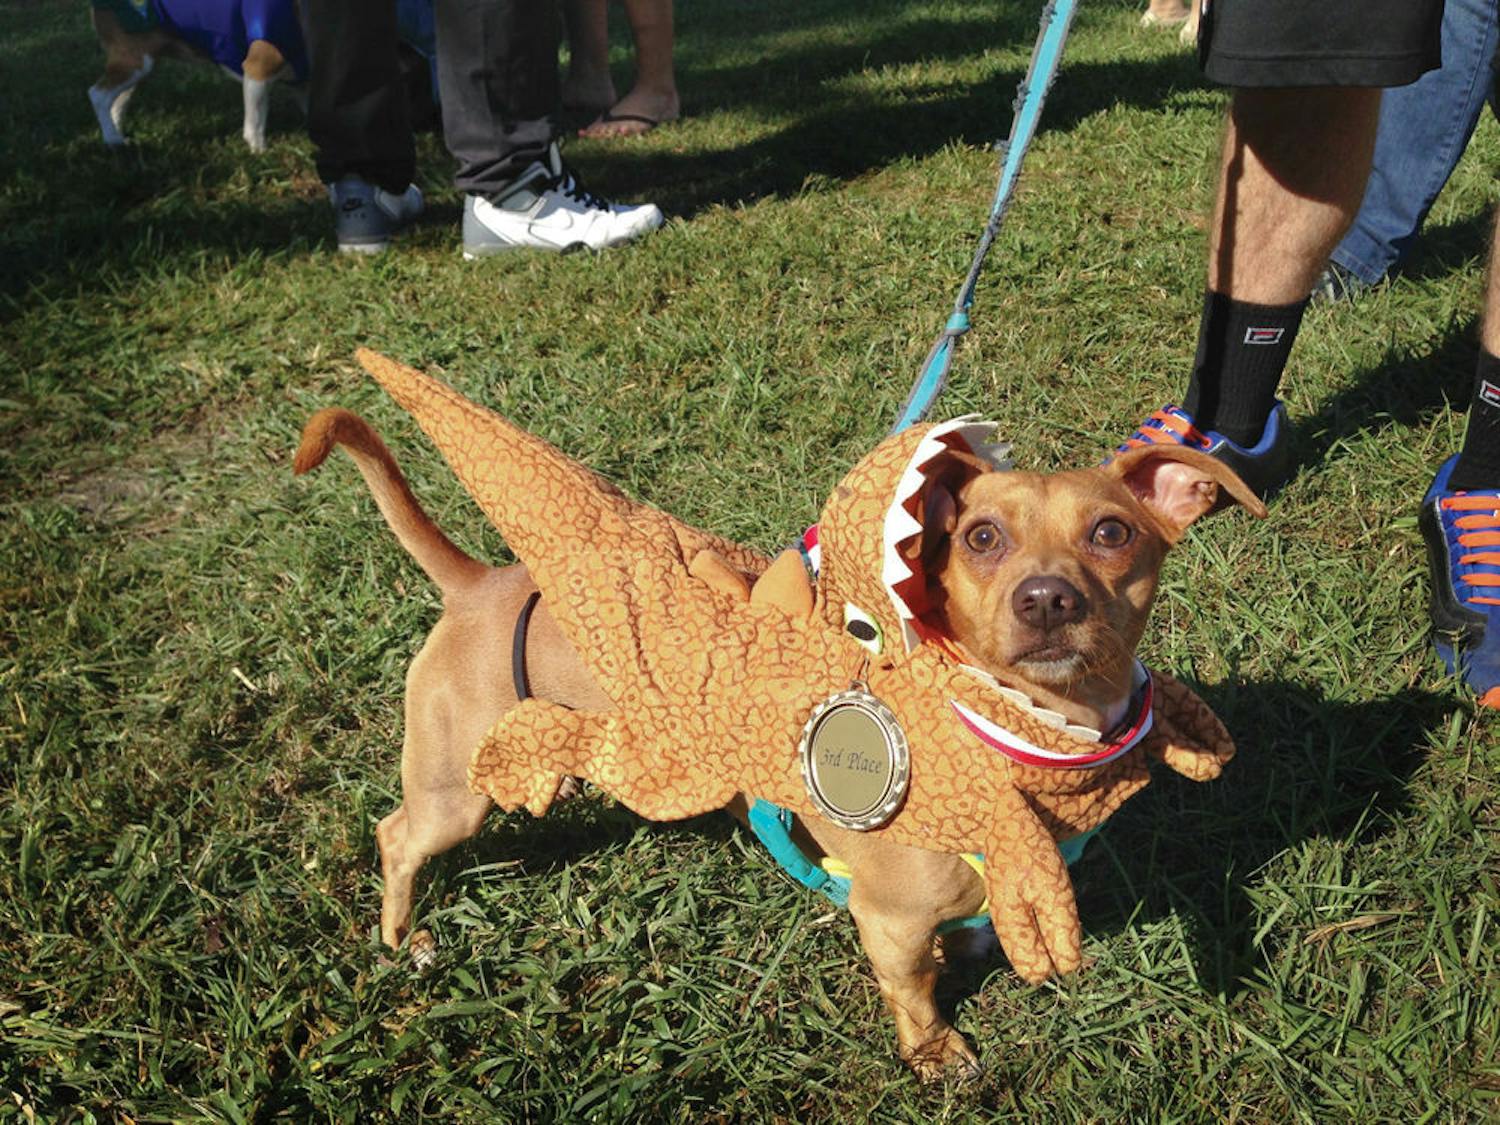 Reptar, a 1-year-old Chi Weenie, placed third in the Halloweener Derby at Kanapaha Veterans Memorial Park on Oct. 17, 2015. His owner, Swamp Restaurant manager Michael Brown, said Reptar had never raced before. “He did surprisingly well,” Brown said. “Honestly, I did not expect him to make it to the finish line.”